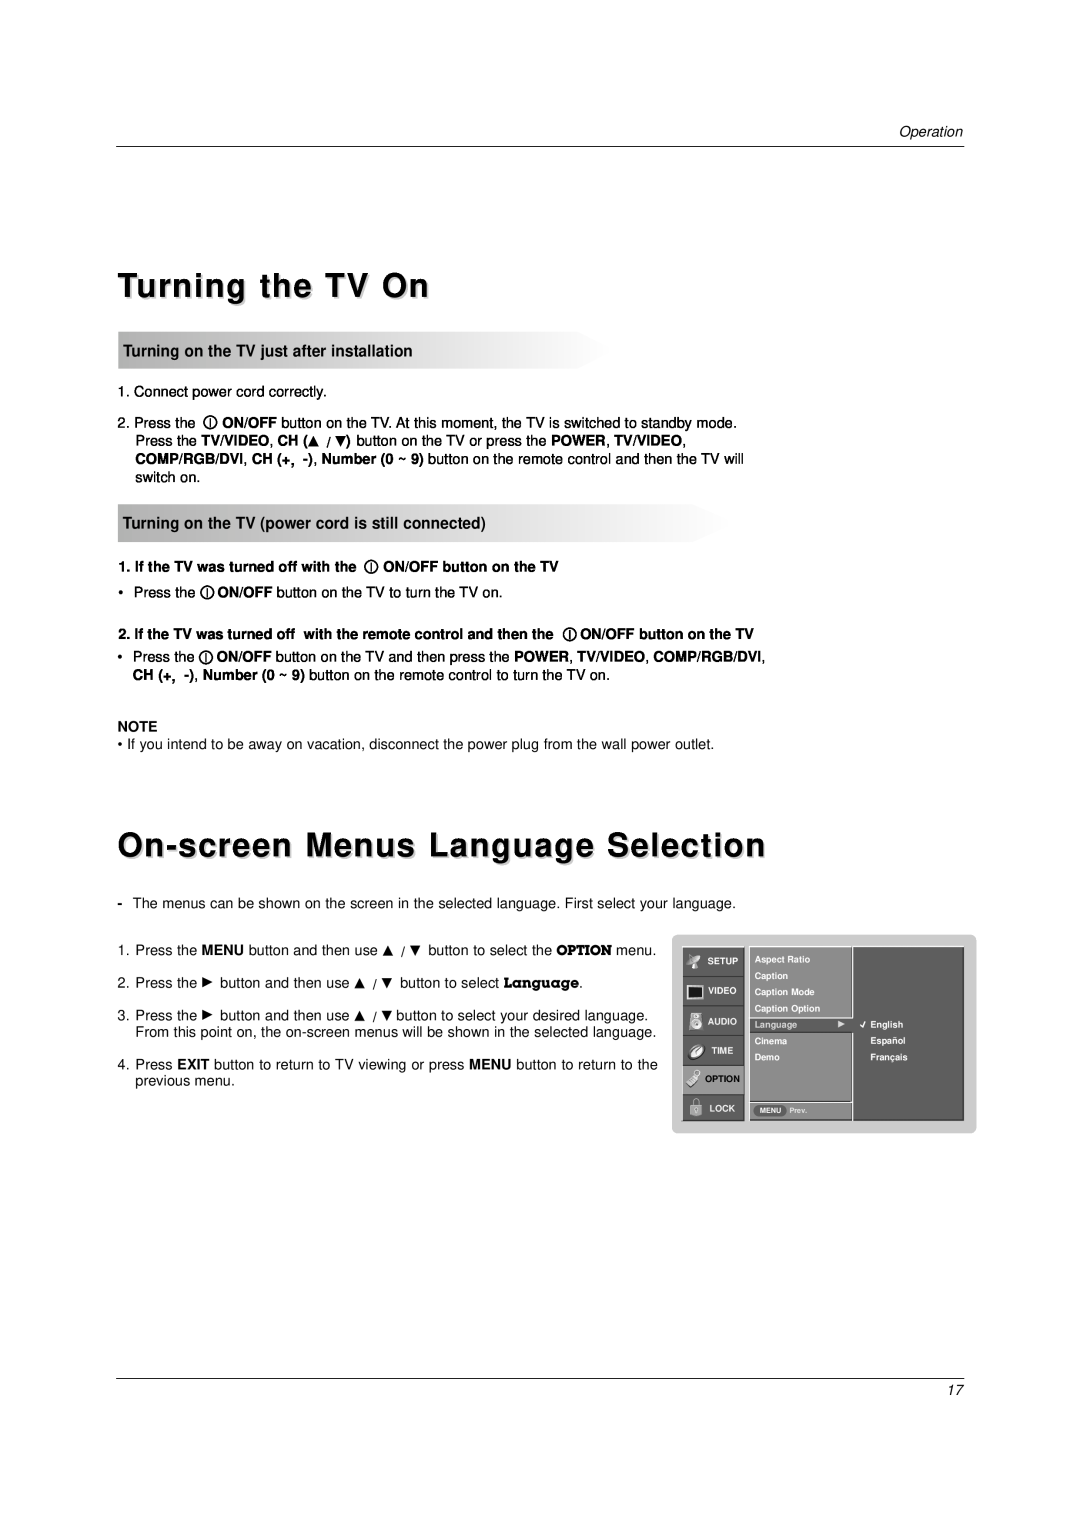 LG Electronics DU-37LZ30 Turning the TV On, On-screen Menus Language Selection, Turning on the TV just after installation 